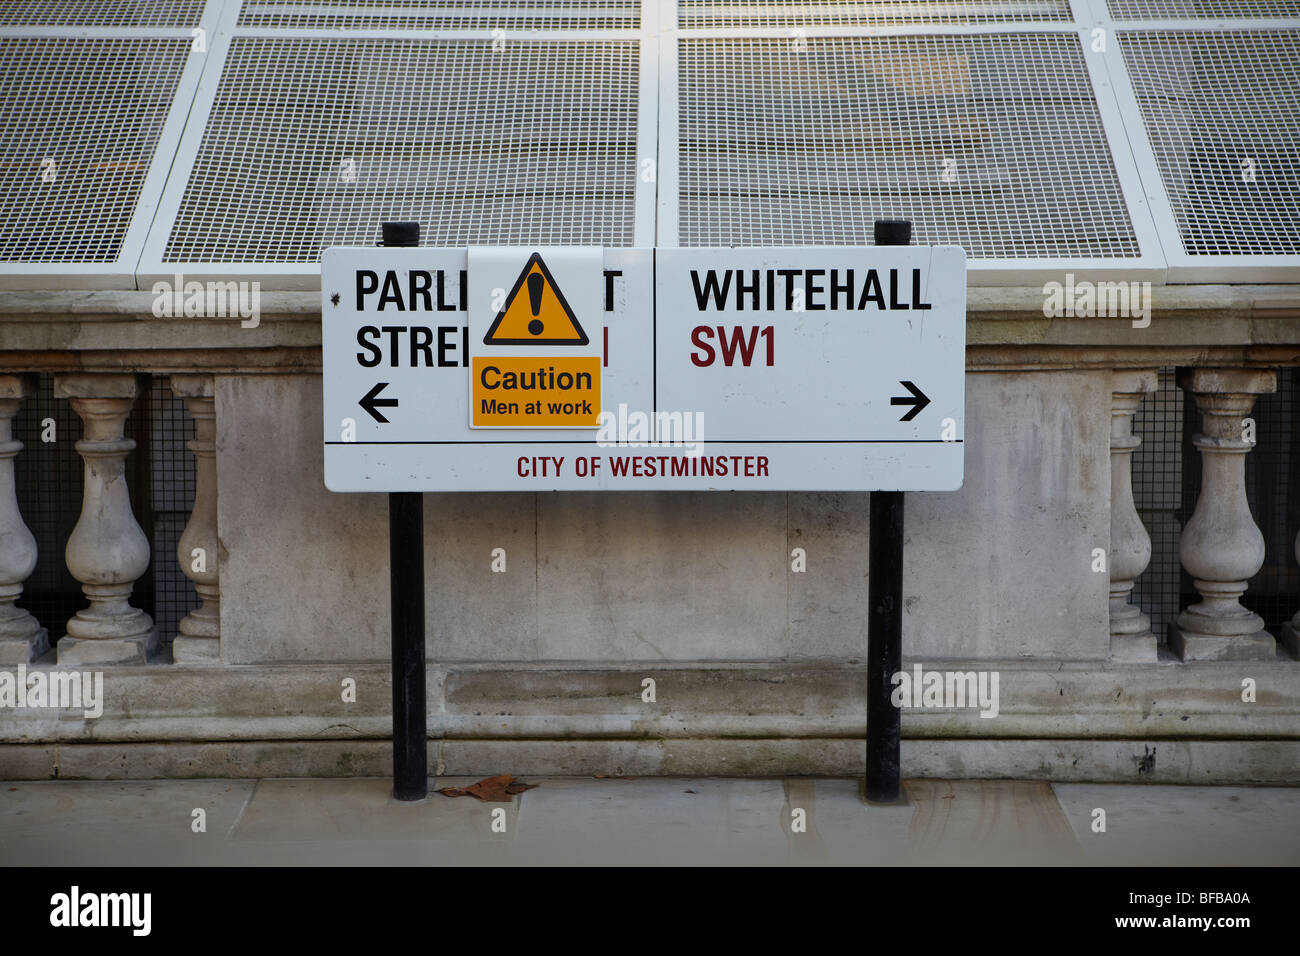 Parliament Street sign on Whitehall with a Caution Men at Work sticker. Stock Photo